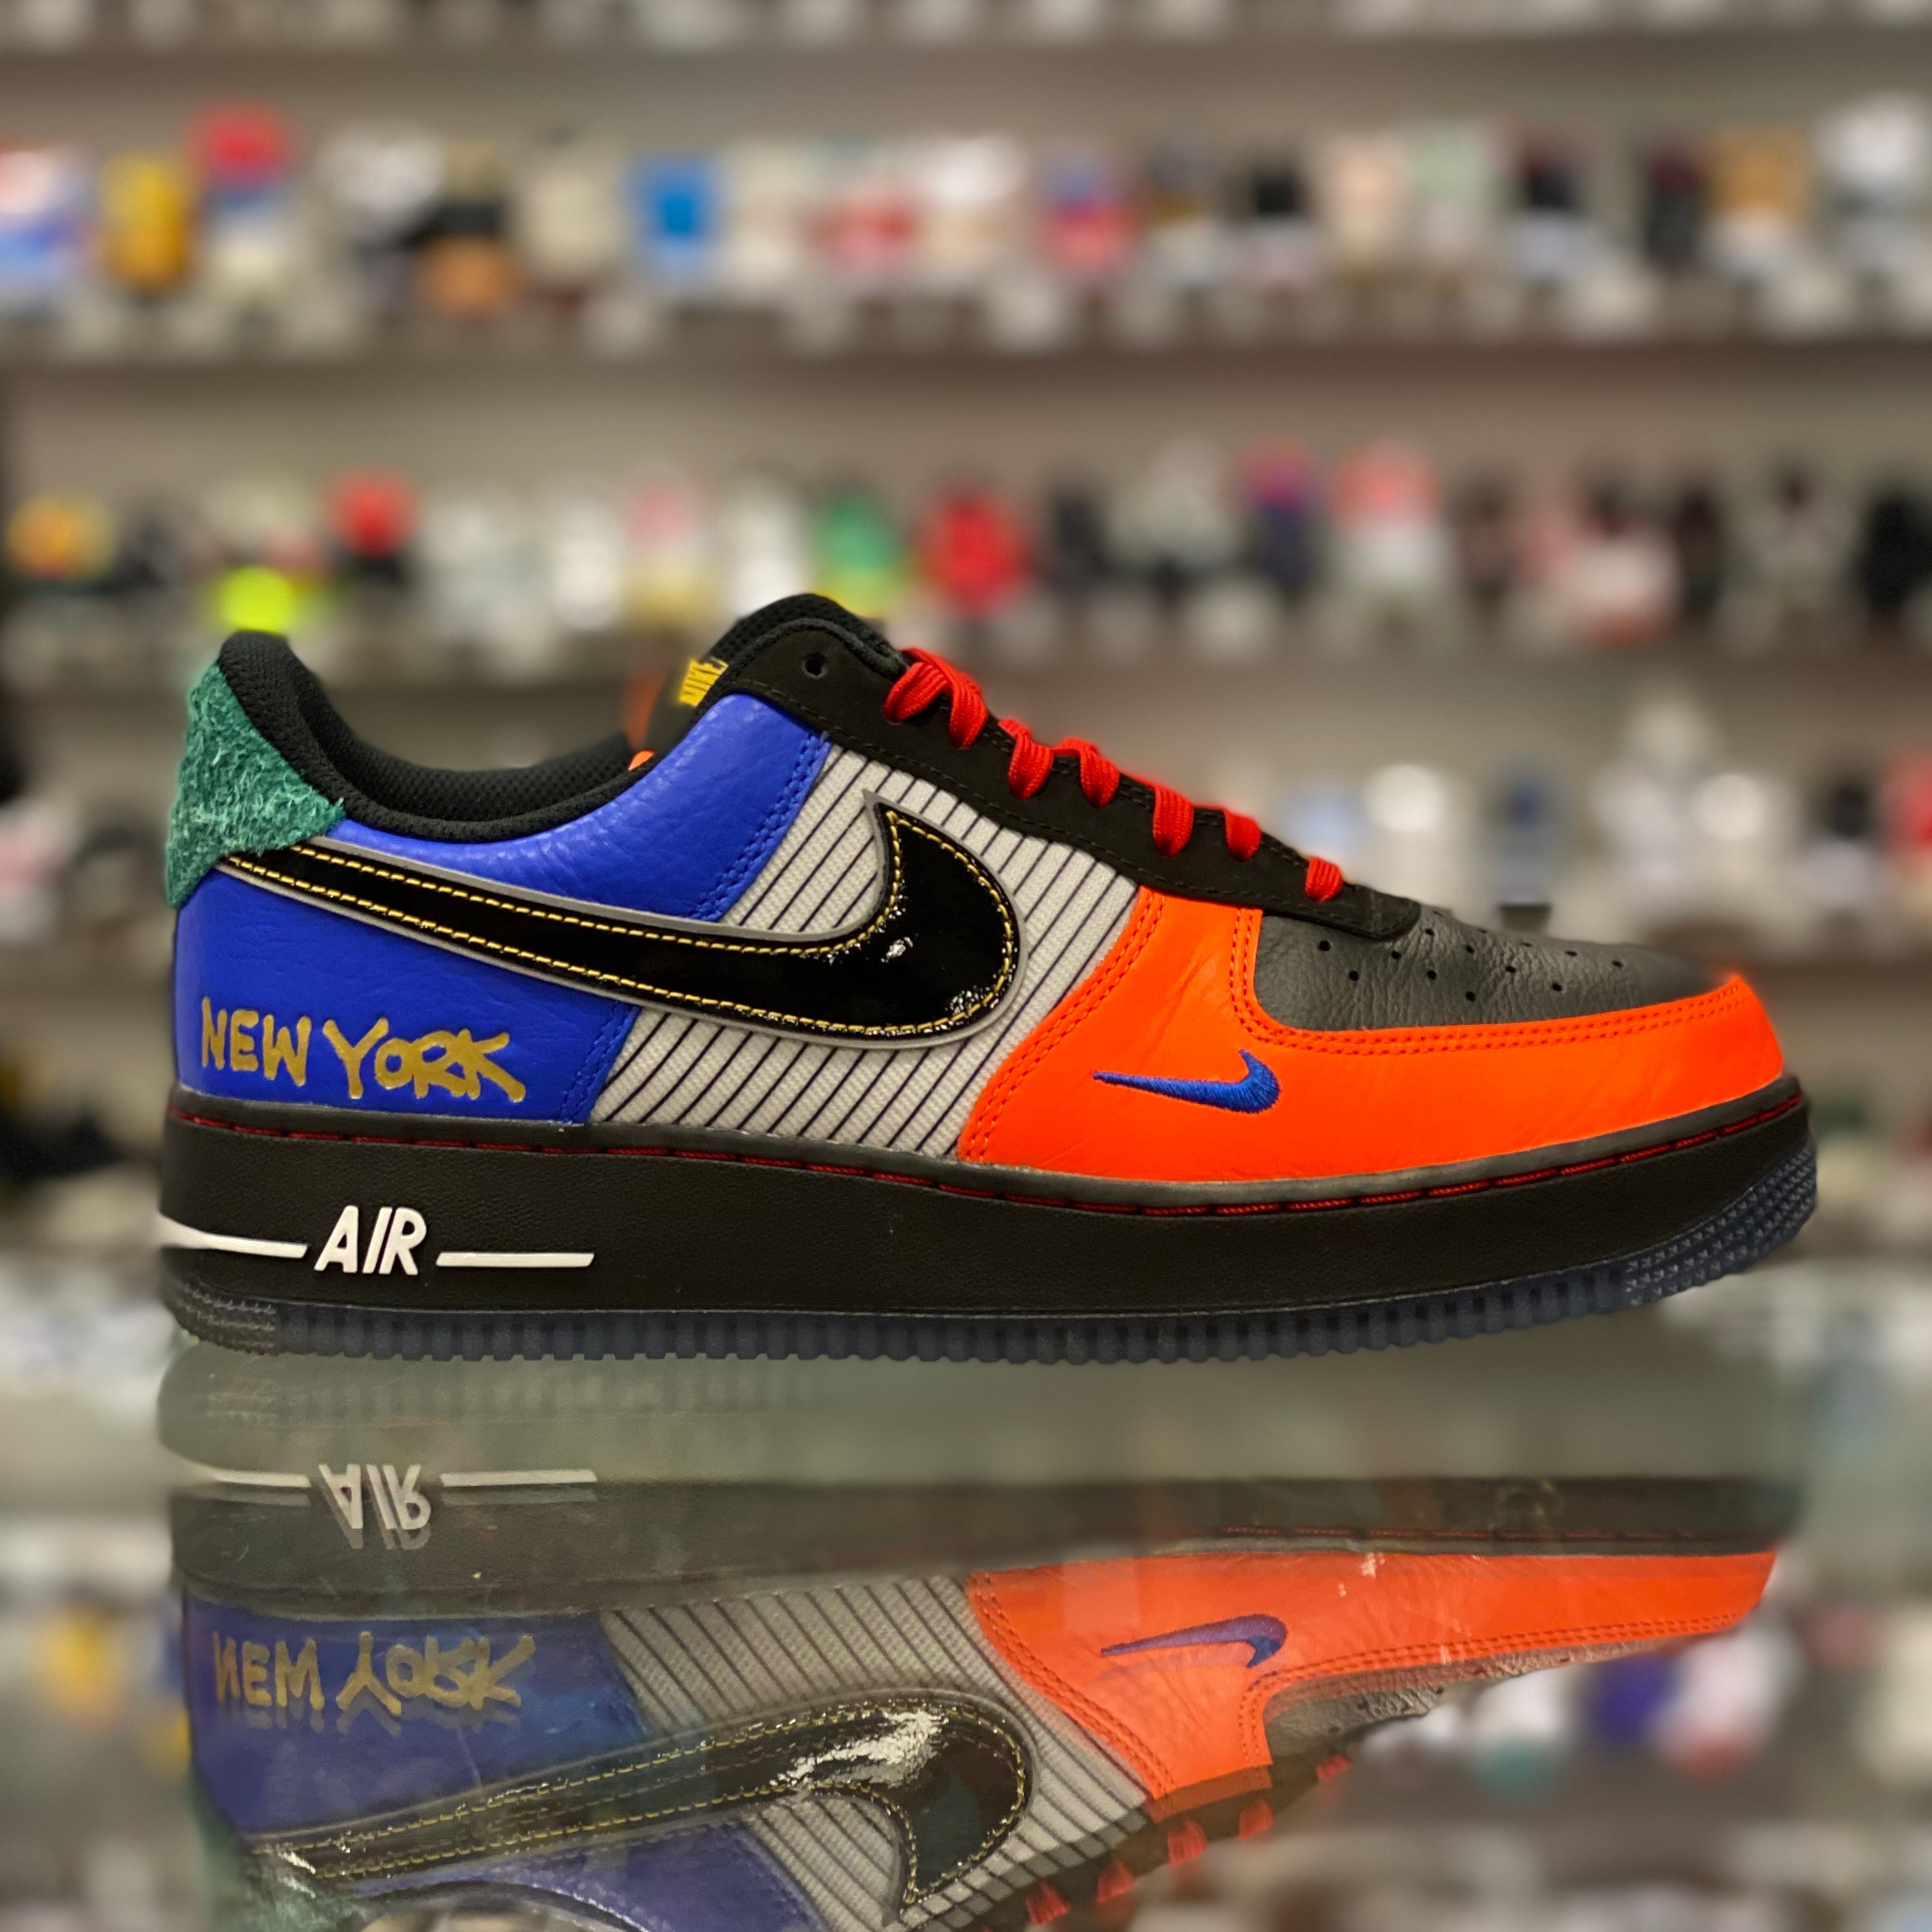 Nike Air Force 1 Low “NYC city of athletes”